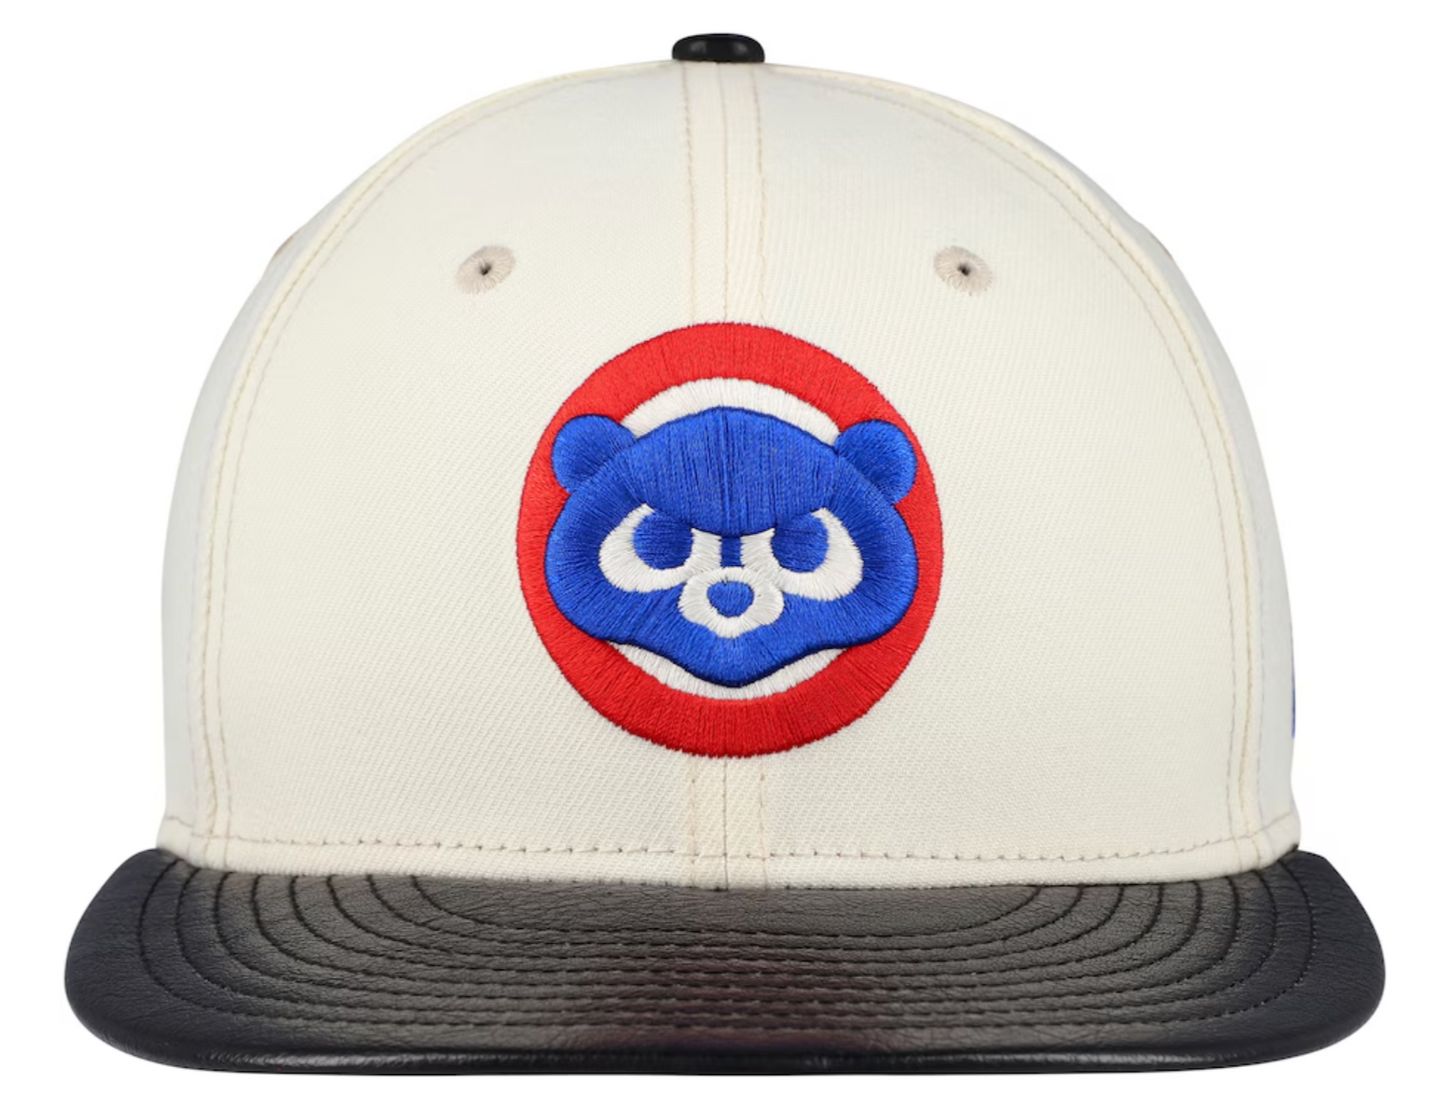 Chicago Cubs Cooperstown Collection Cream/Black Leather Visor New Era 59FIFTY Fitted Hat